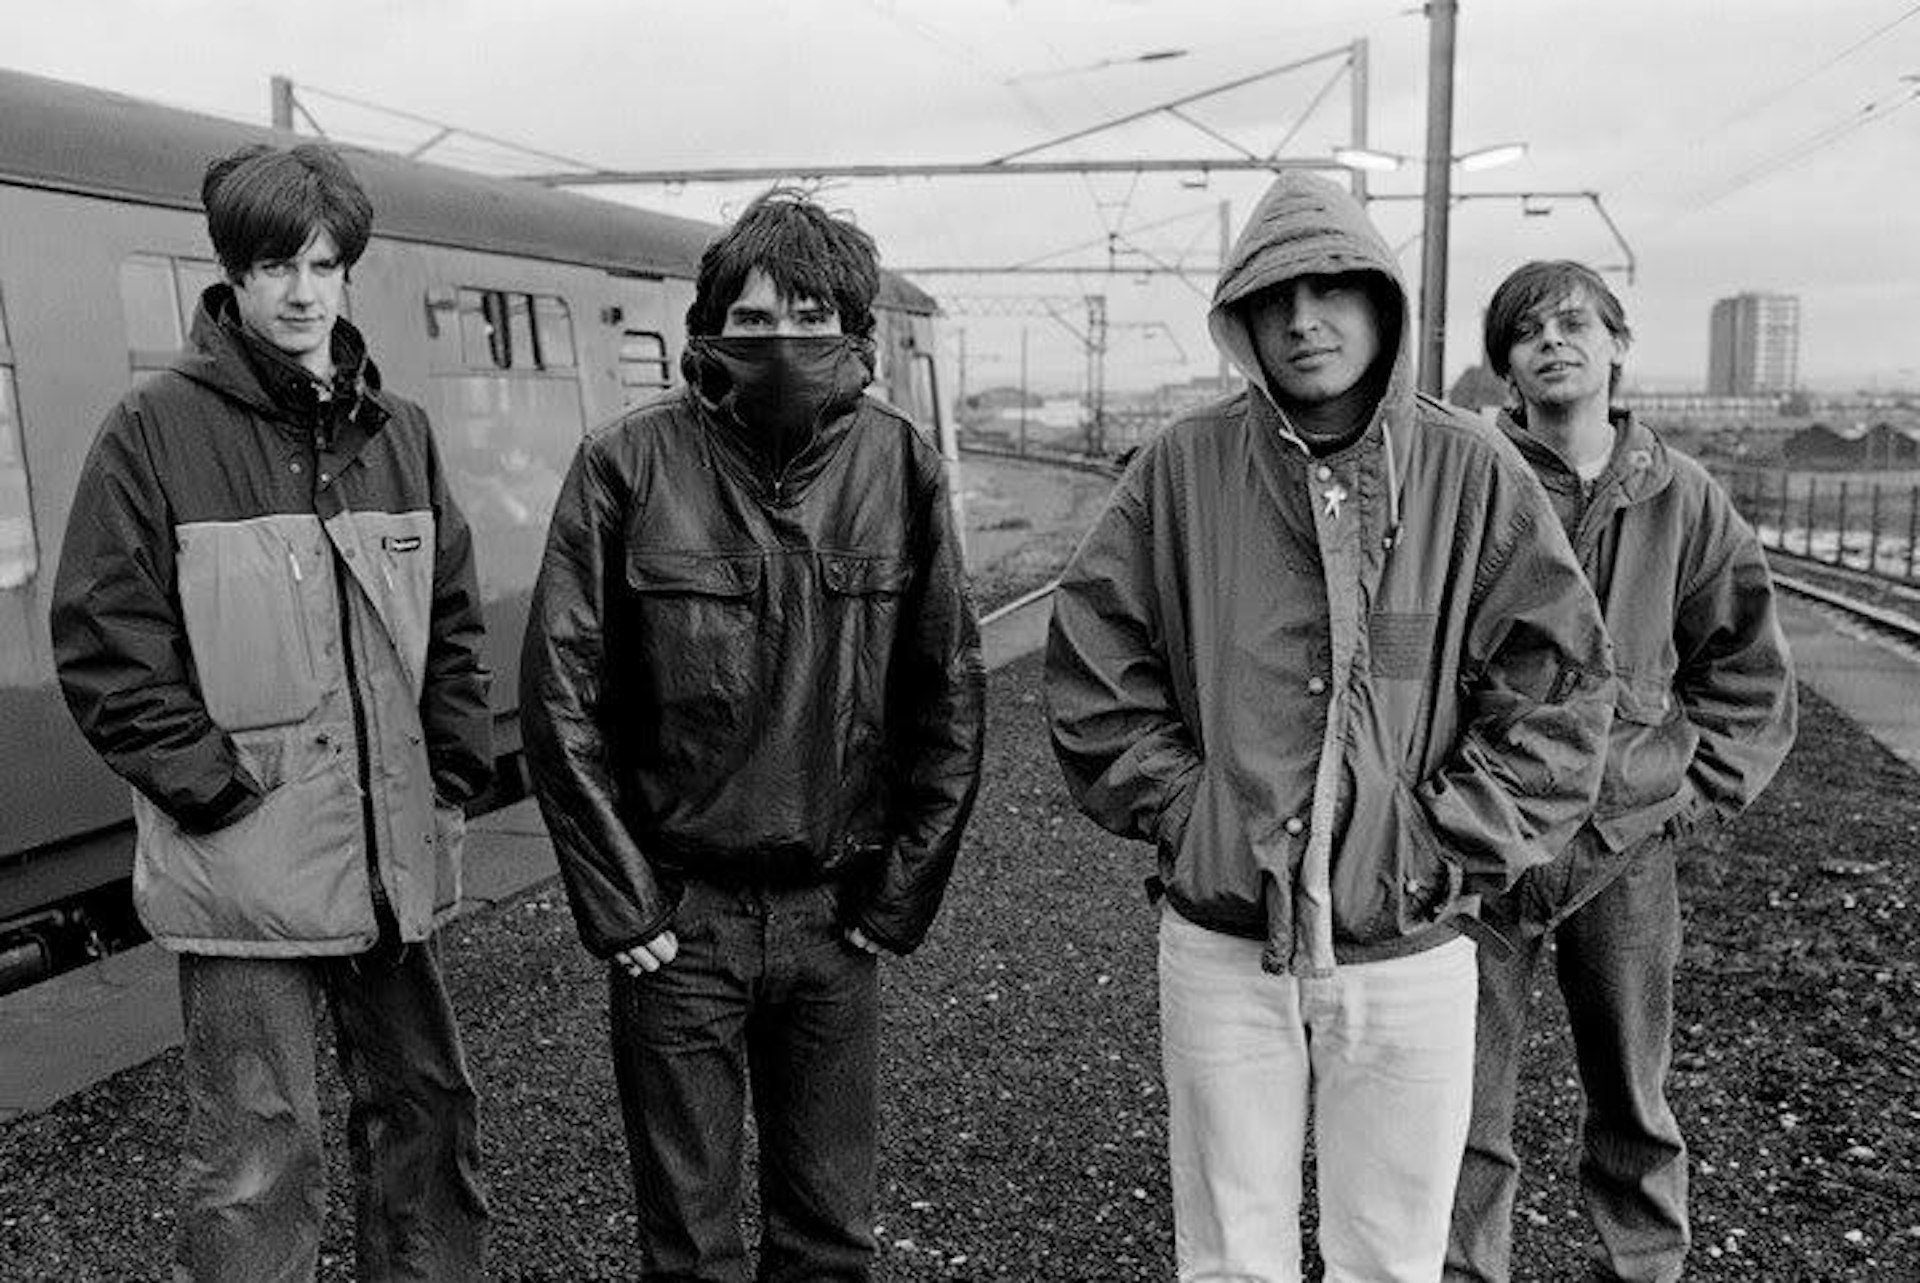 Stone Roses Gig: 25th anniversary of a seminal moment in rave culture